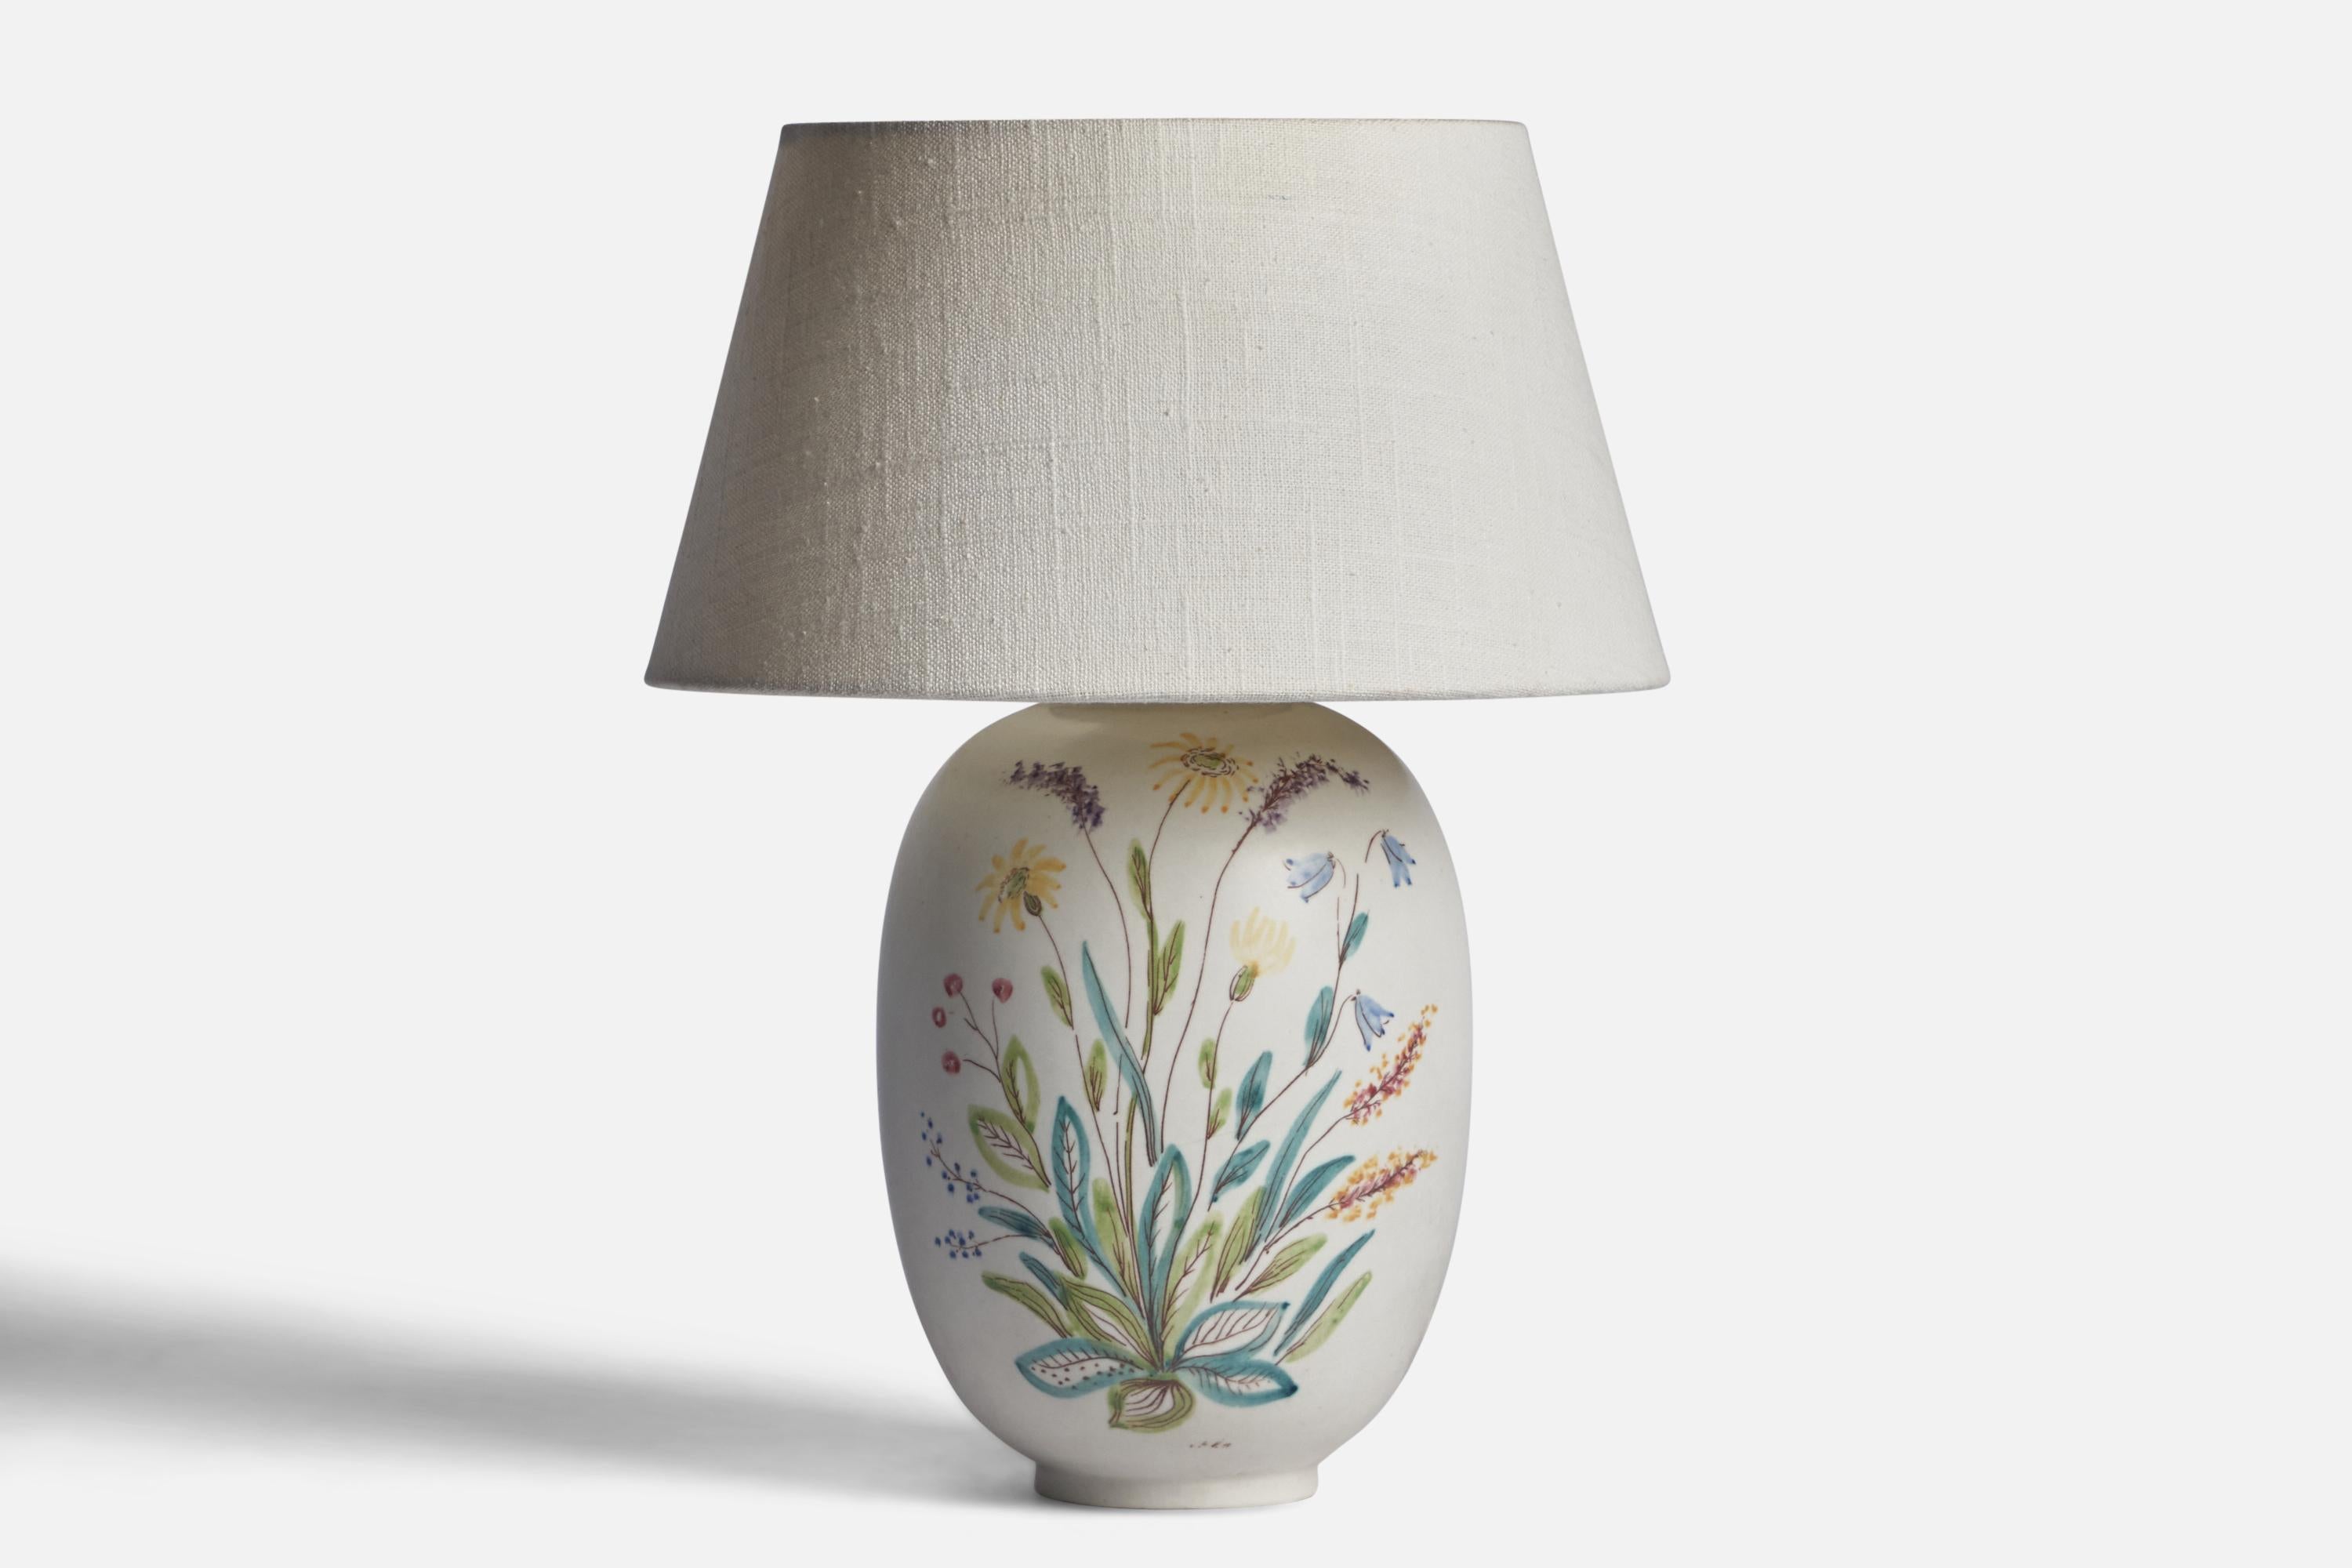 A white-glazed and hand-painted stoneware table lamp designed by Carl-Harry Stålhane and produced by Rörstrand, Sweden, 1950s.

Dimensions of Lamp (inches): 10.65” H x 5.75” Diameter
Dimensions of Shade (inches): 7” Top Diameter x 10” Bottom